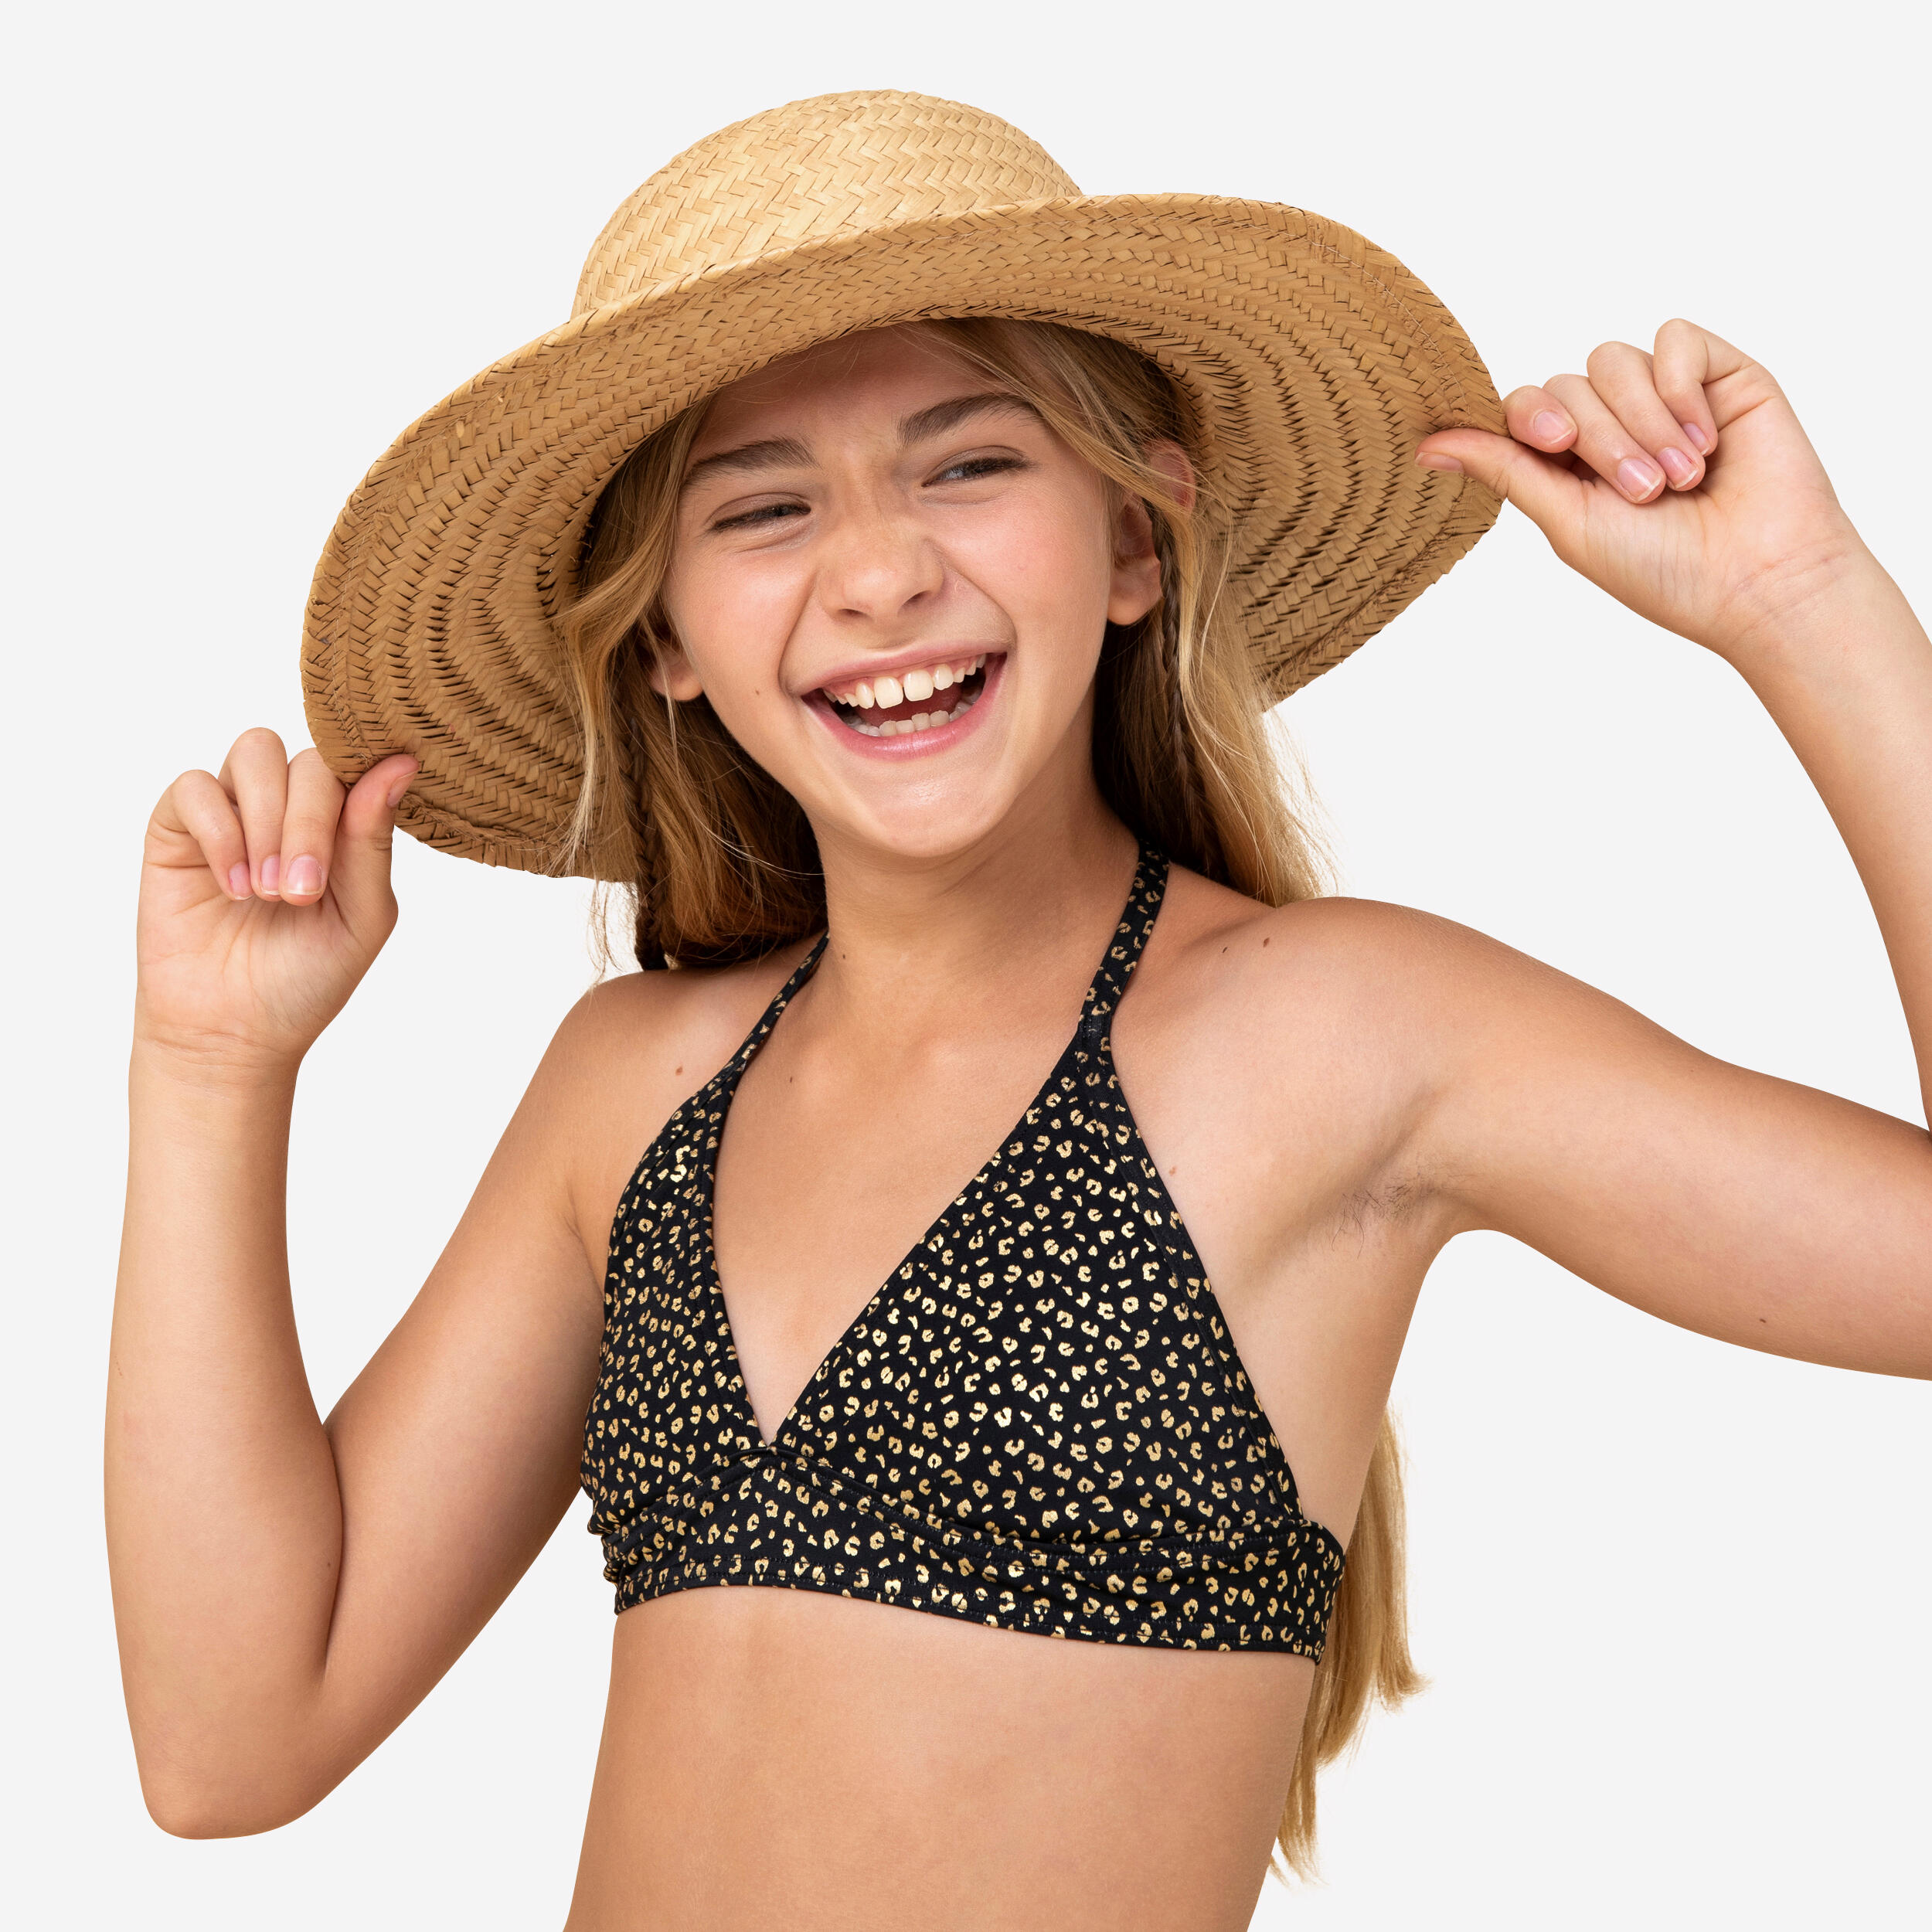 OLAIAN GIRLS’ SWIMSUIT TOP WITH COLLAR 100 - BLACK